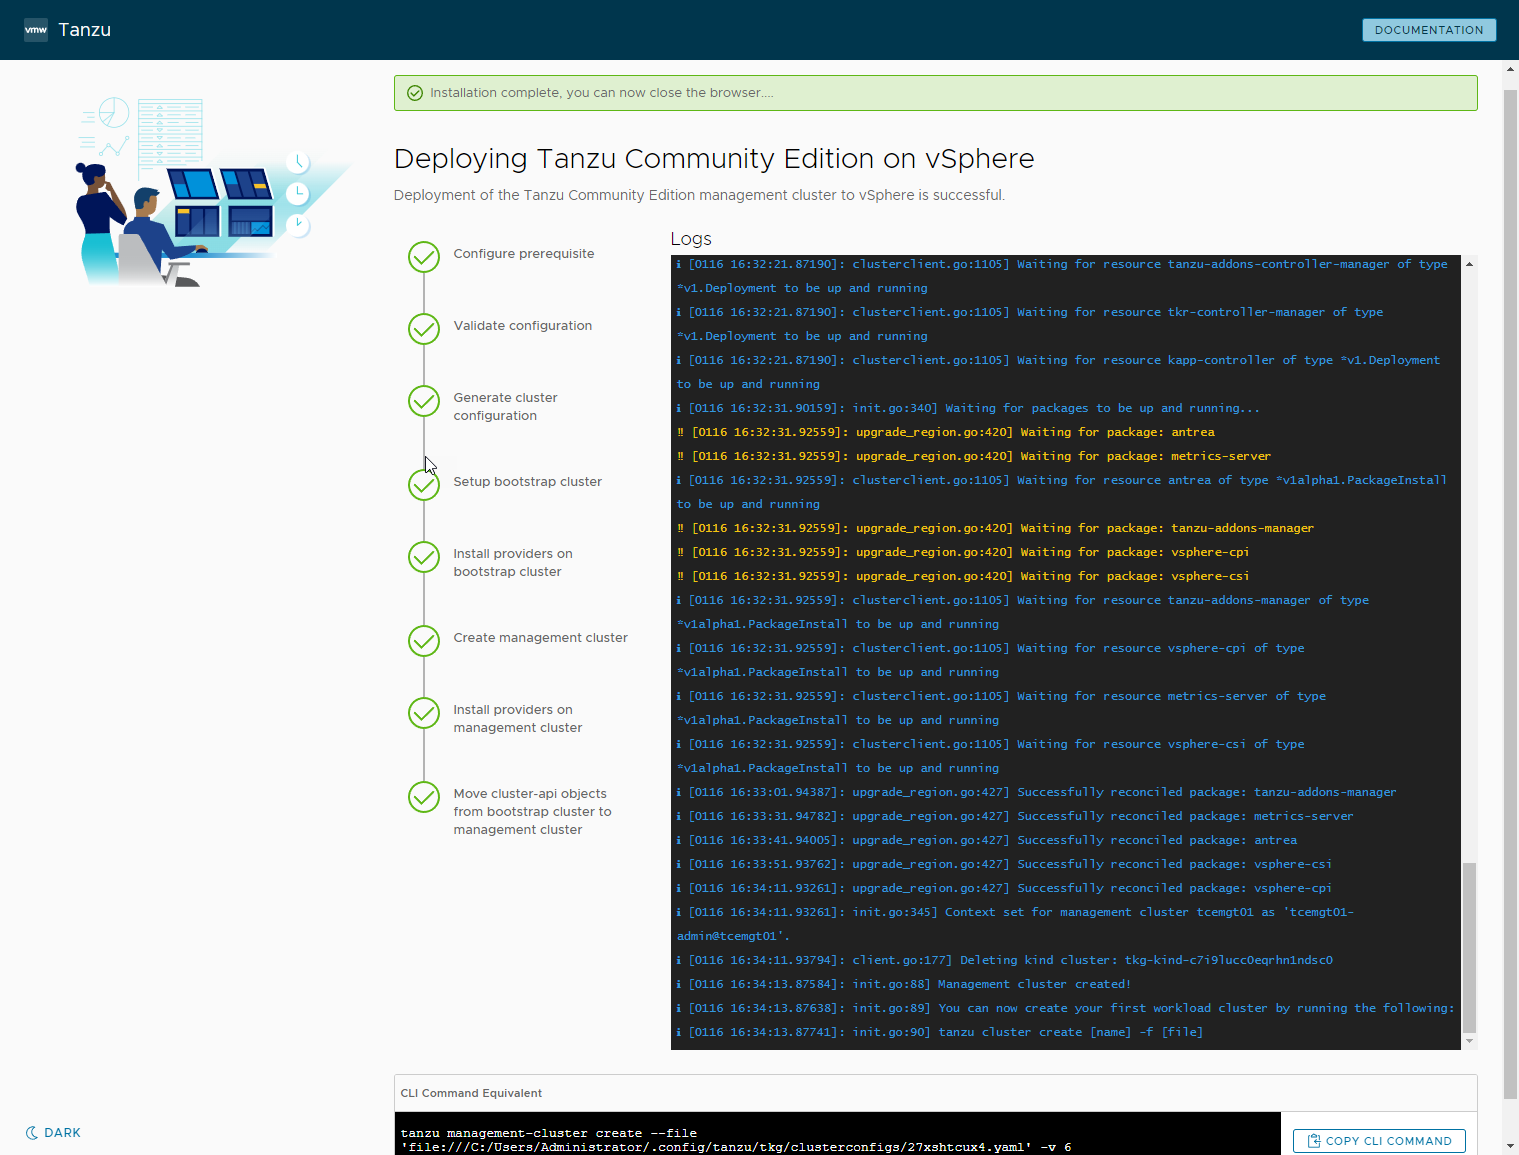 The Tanzu Community Edition management cluster deployment completes successfully